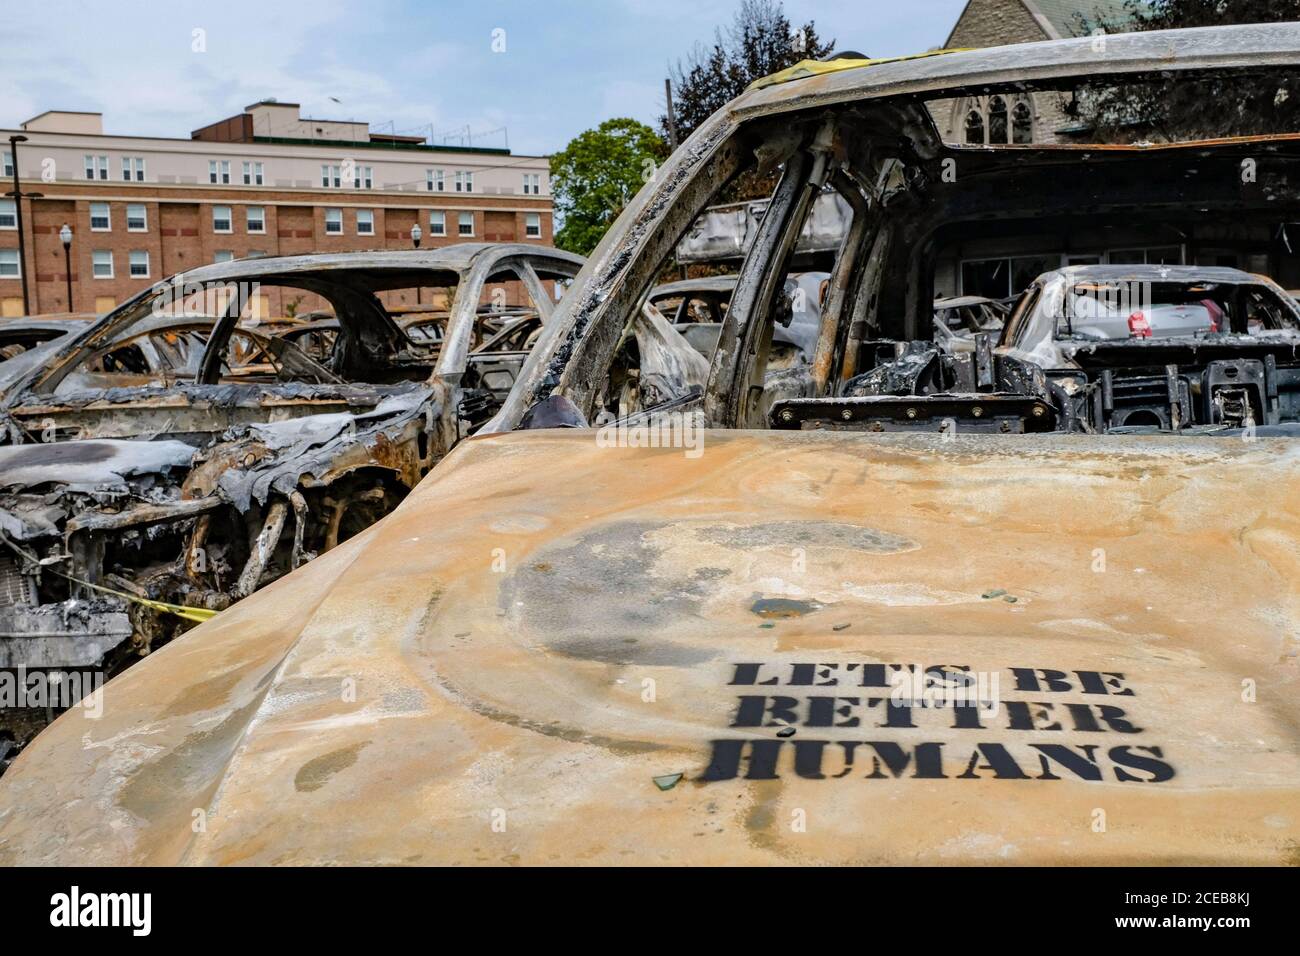 Kenosha, United States. 31st Aug, 2020. 'Let's Be Better Humans' is written on the vehicles on the lot of Car Source, a pre-owned vehicle dealership, are shown on Monday, August 31, 2020, after they were torched by protesters during demonstrations against the shooting in the back of a Jacob Blake, an unarmed Black man last week in Kenosha, Wisconsin. Photo by Alex Wroblewski/UPI Credit: UPI/Alamy Live News Stock Photo